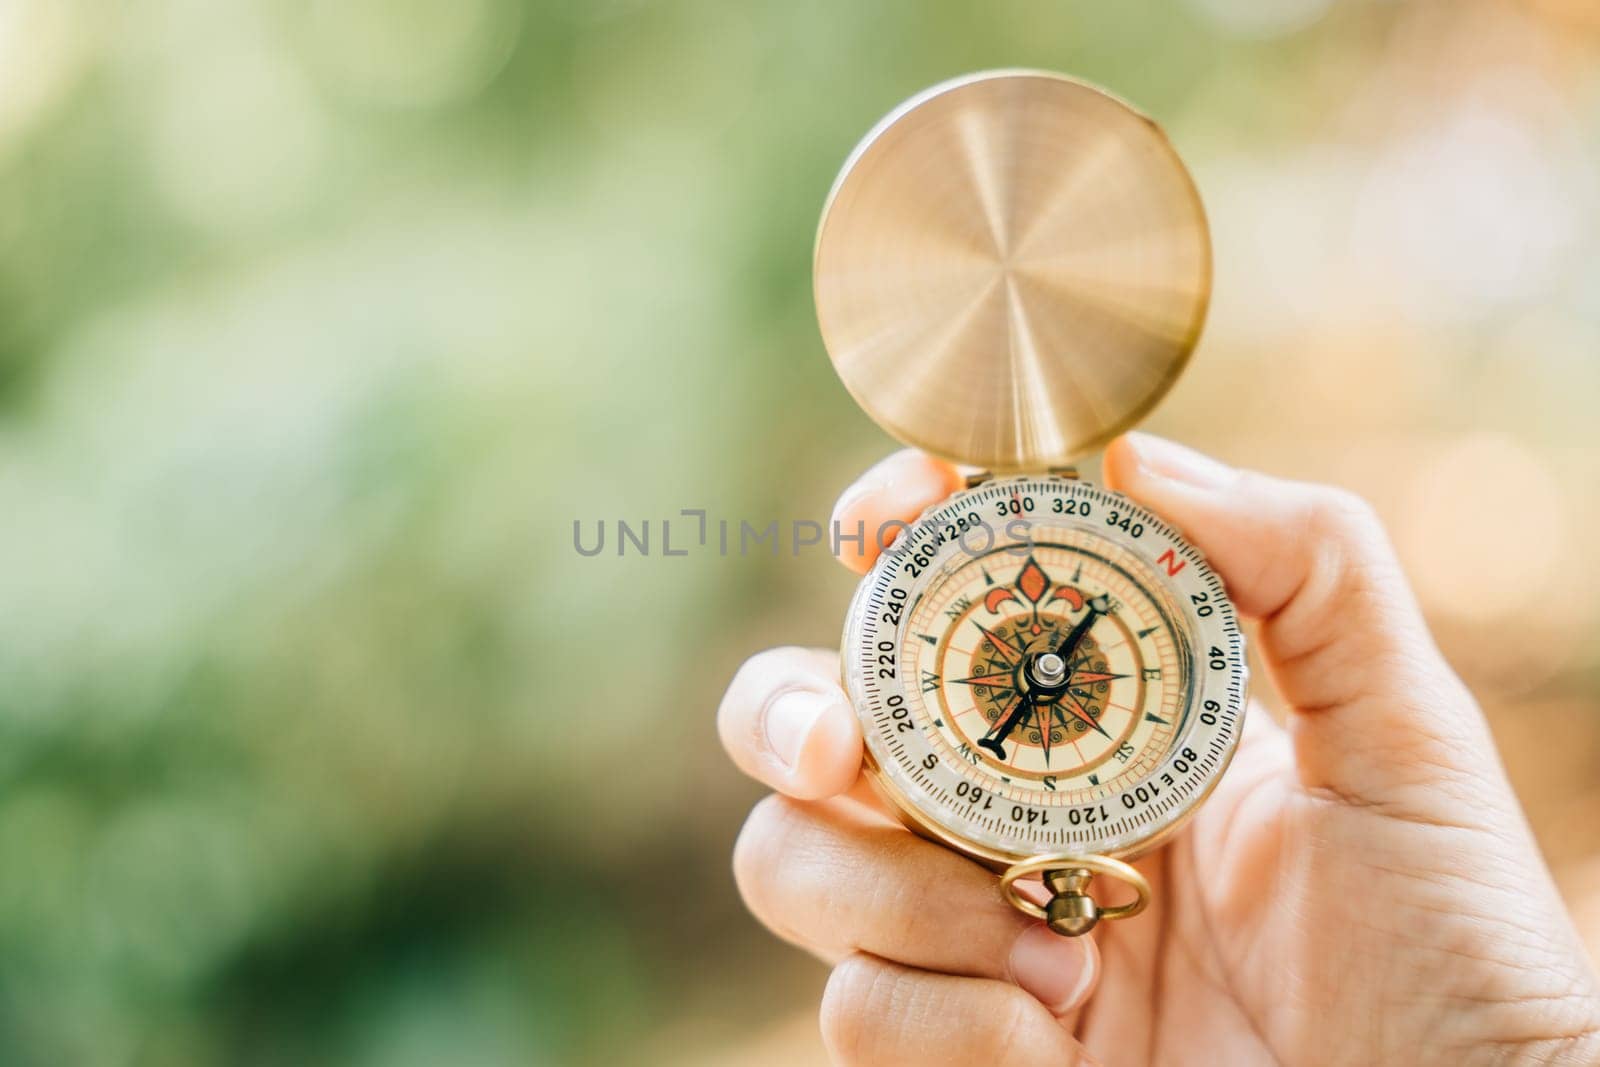 With a picturesque forest and tranquil lake in the background a woman's hand securely holds a compass symbolizing guidance and the exciting exploration that awaits.